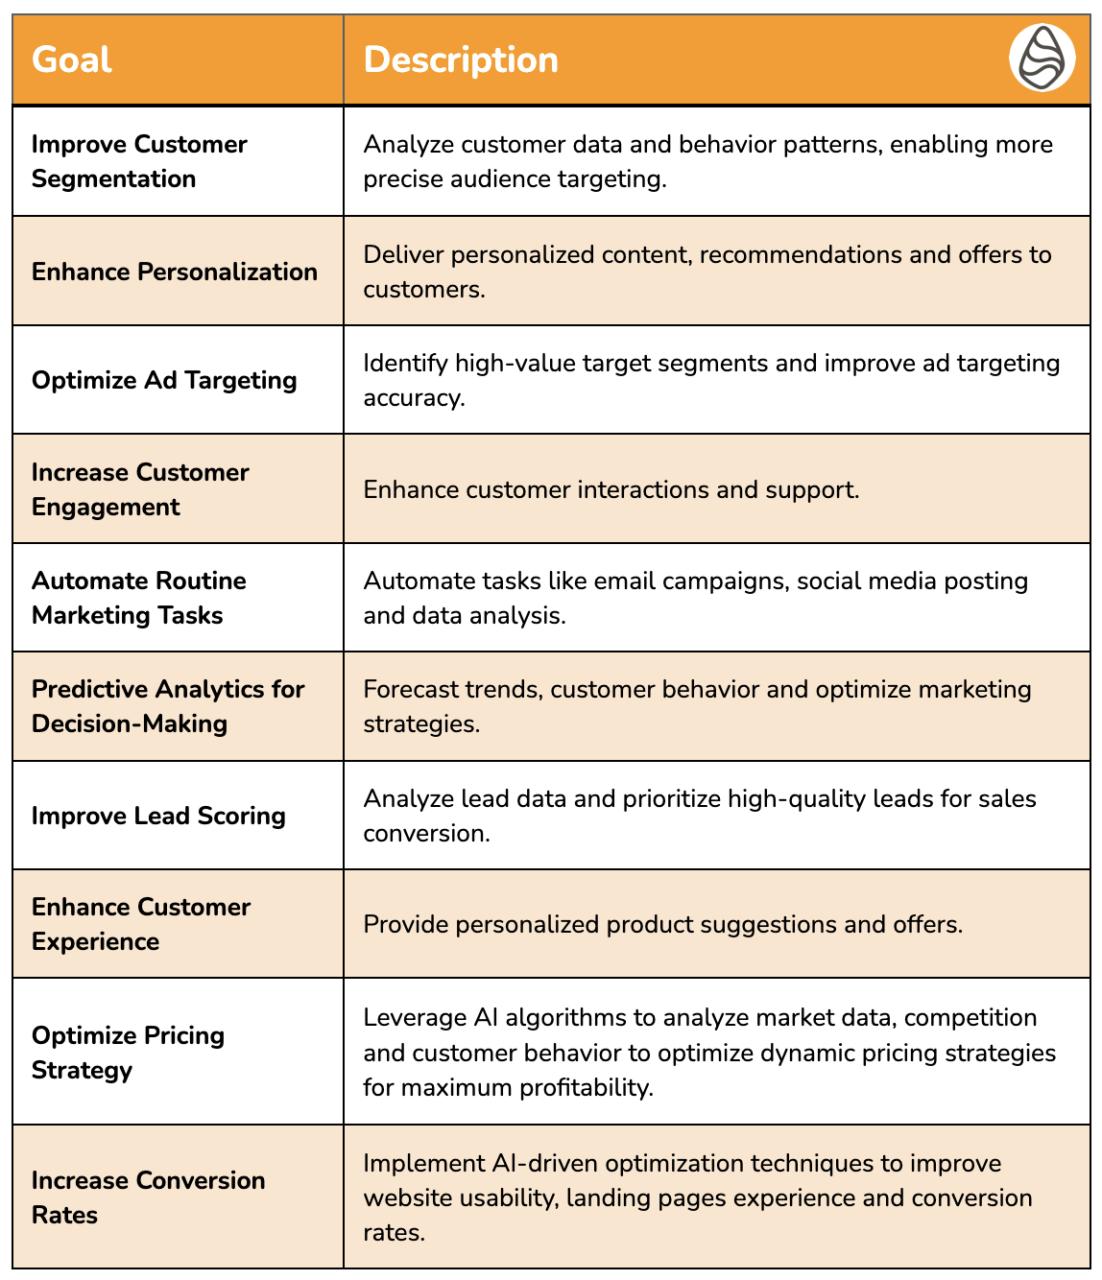 Table listing goals for AI in marketing